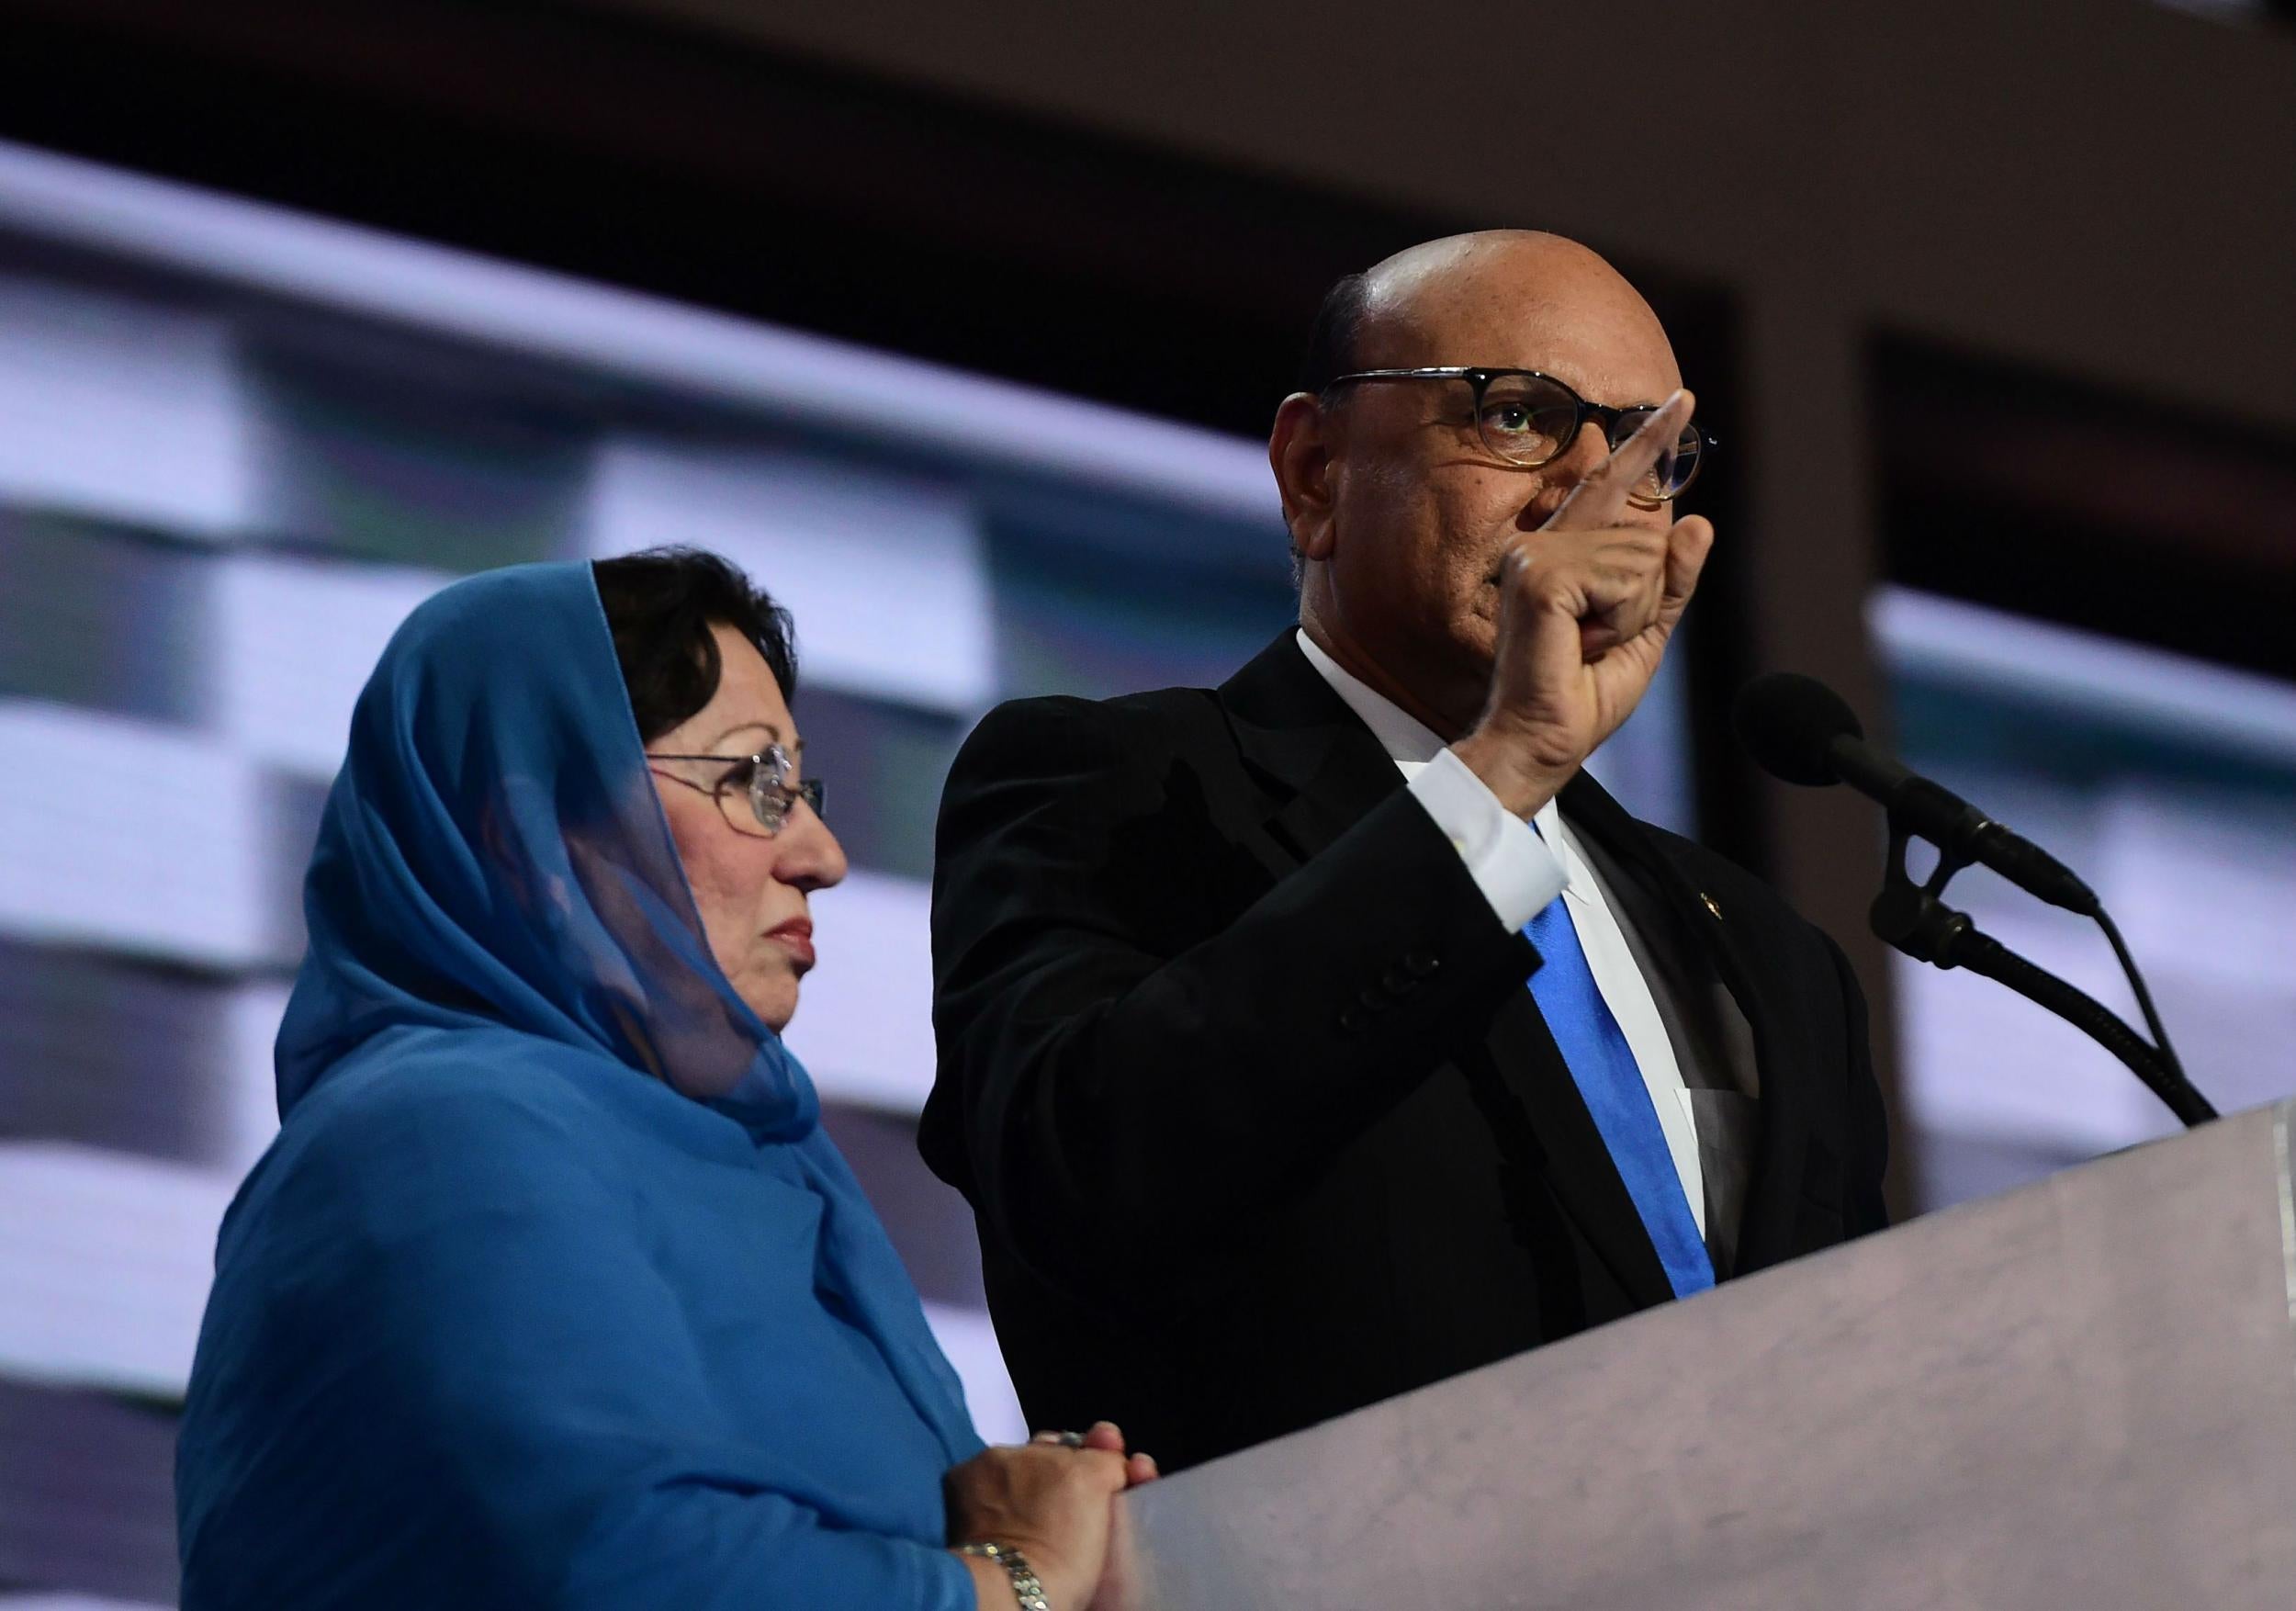 Ghazala Khan (left) joined her husband Khizr on stage at the Democratic convention last week as he criticised Trump